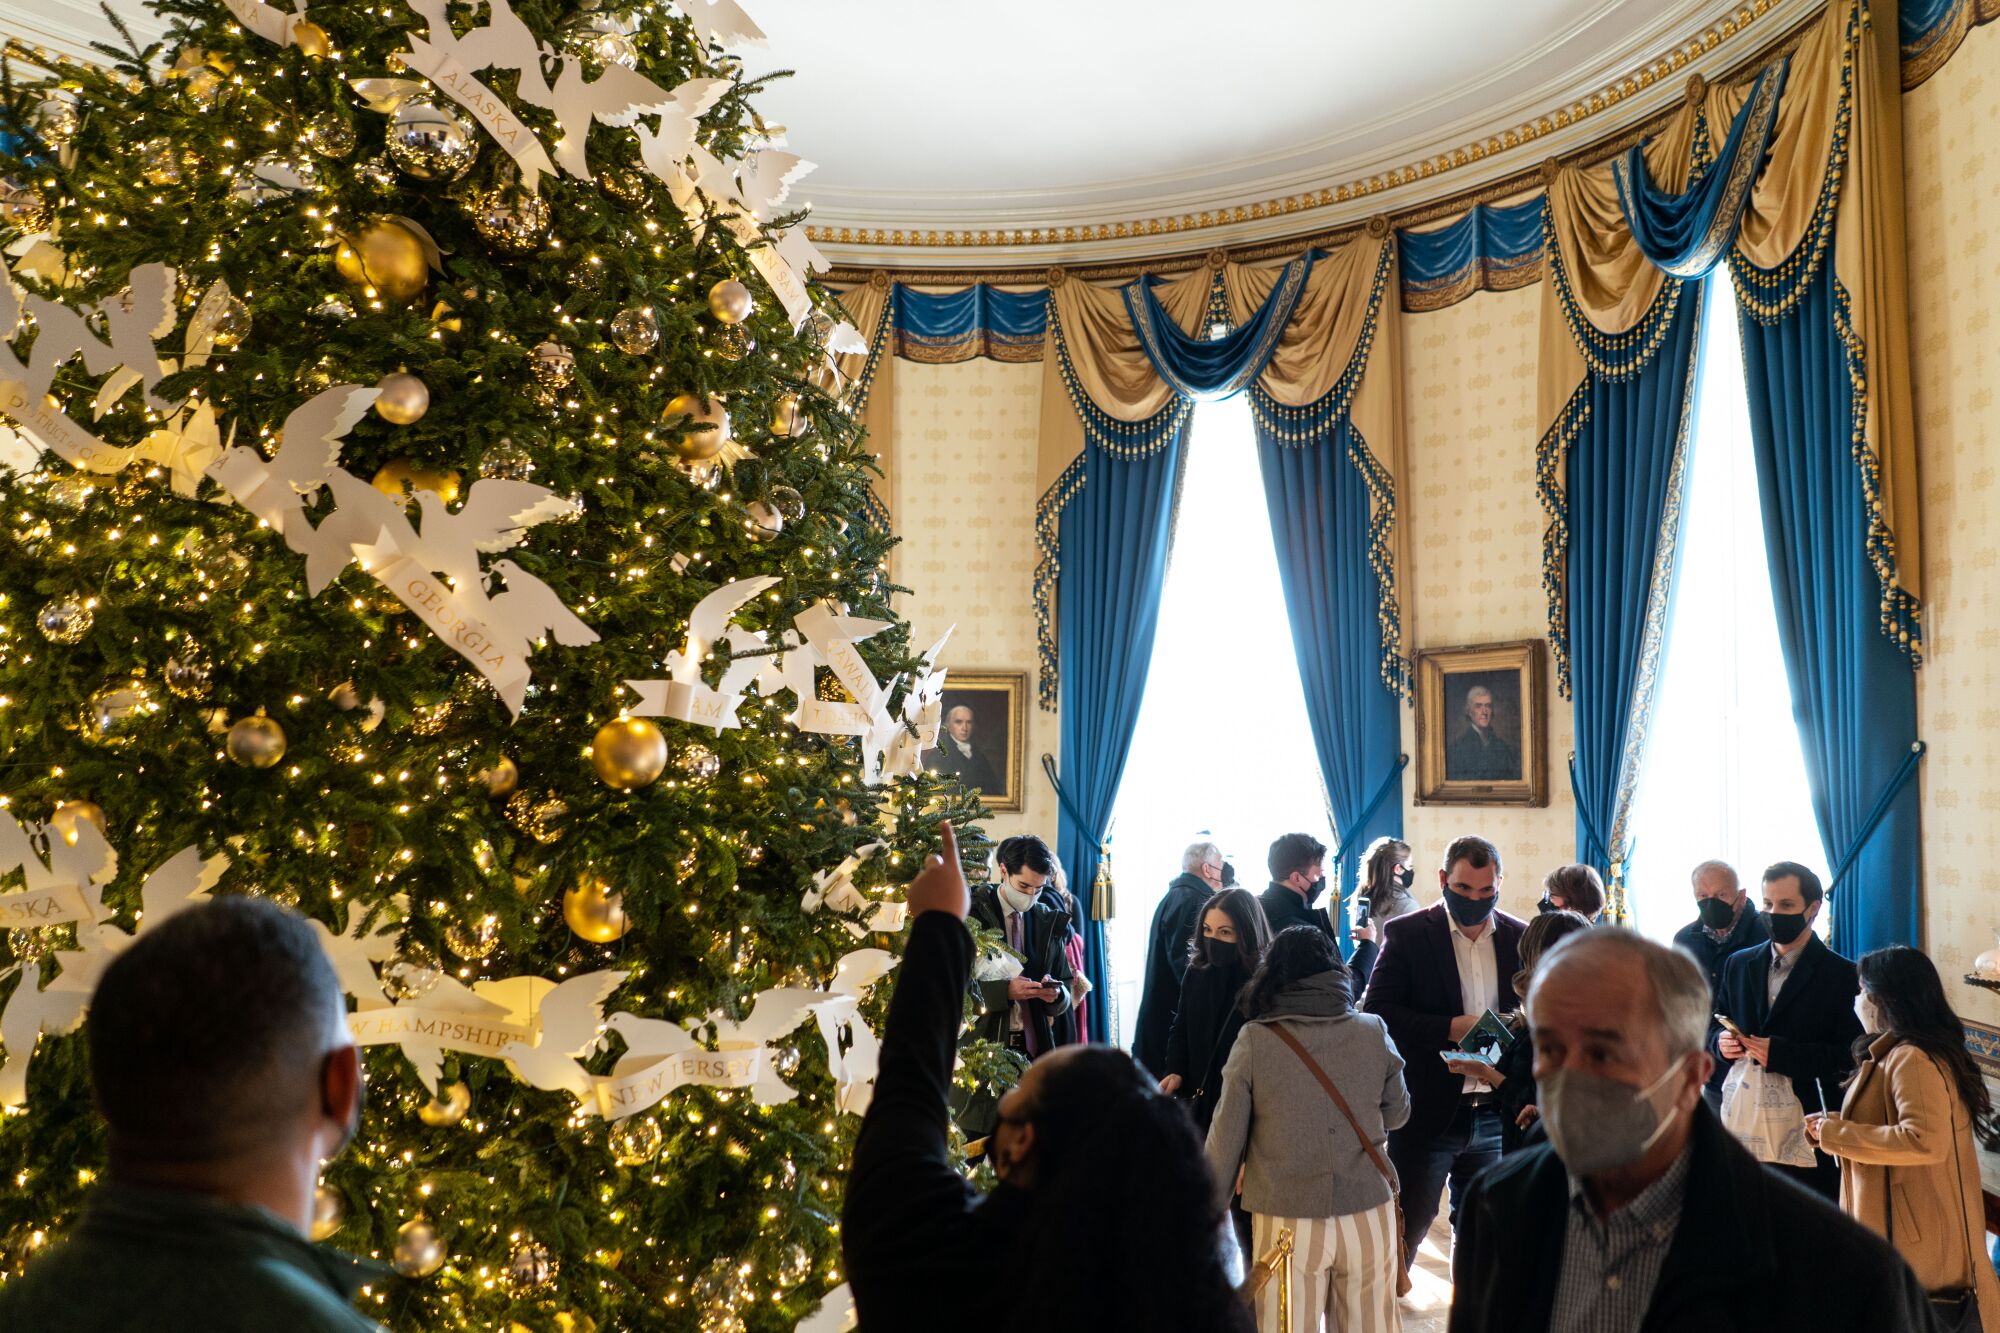 Members of the public look at the official White House Christmas tree in the Blue Room.